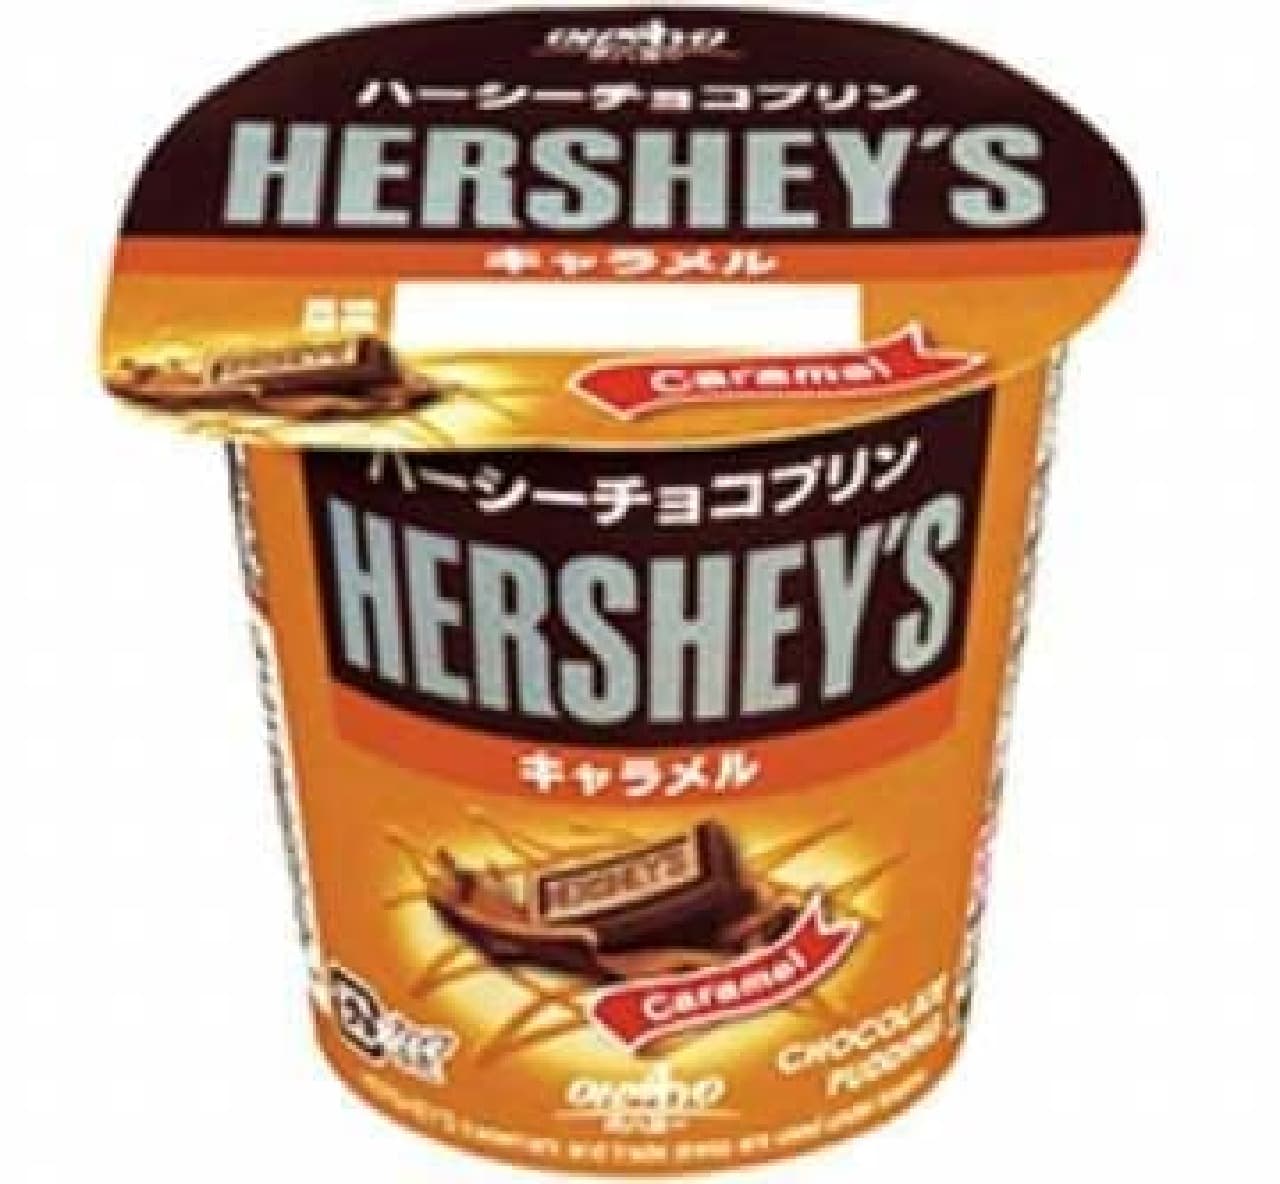 "Caramel" Appears in Hershey Chocolate Pudding